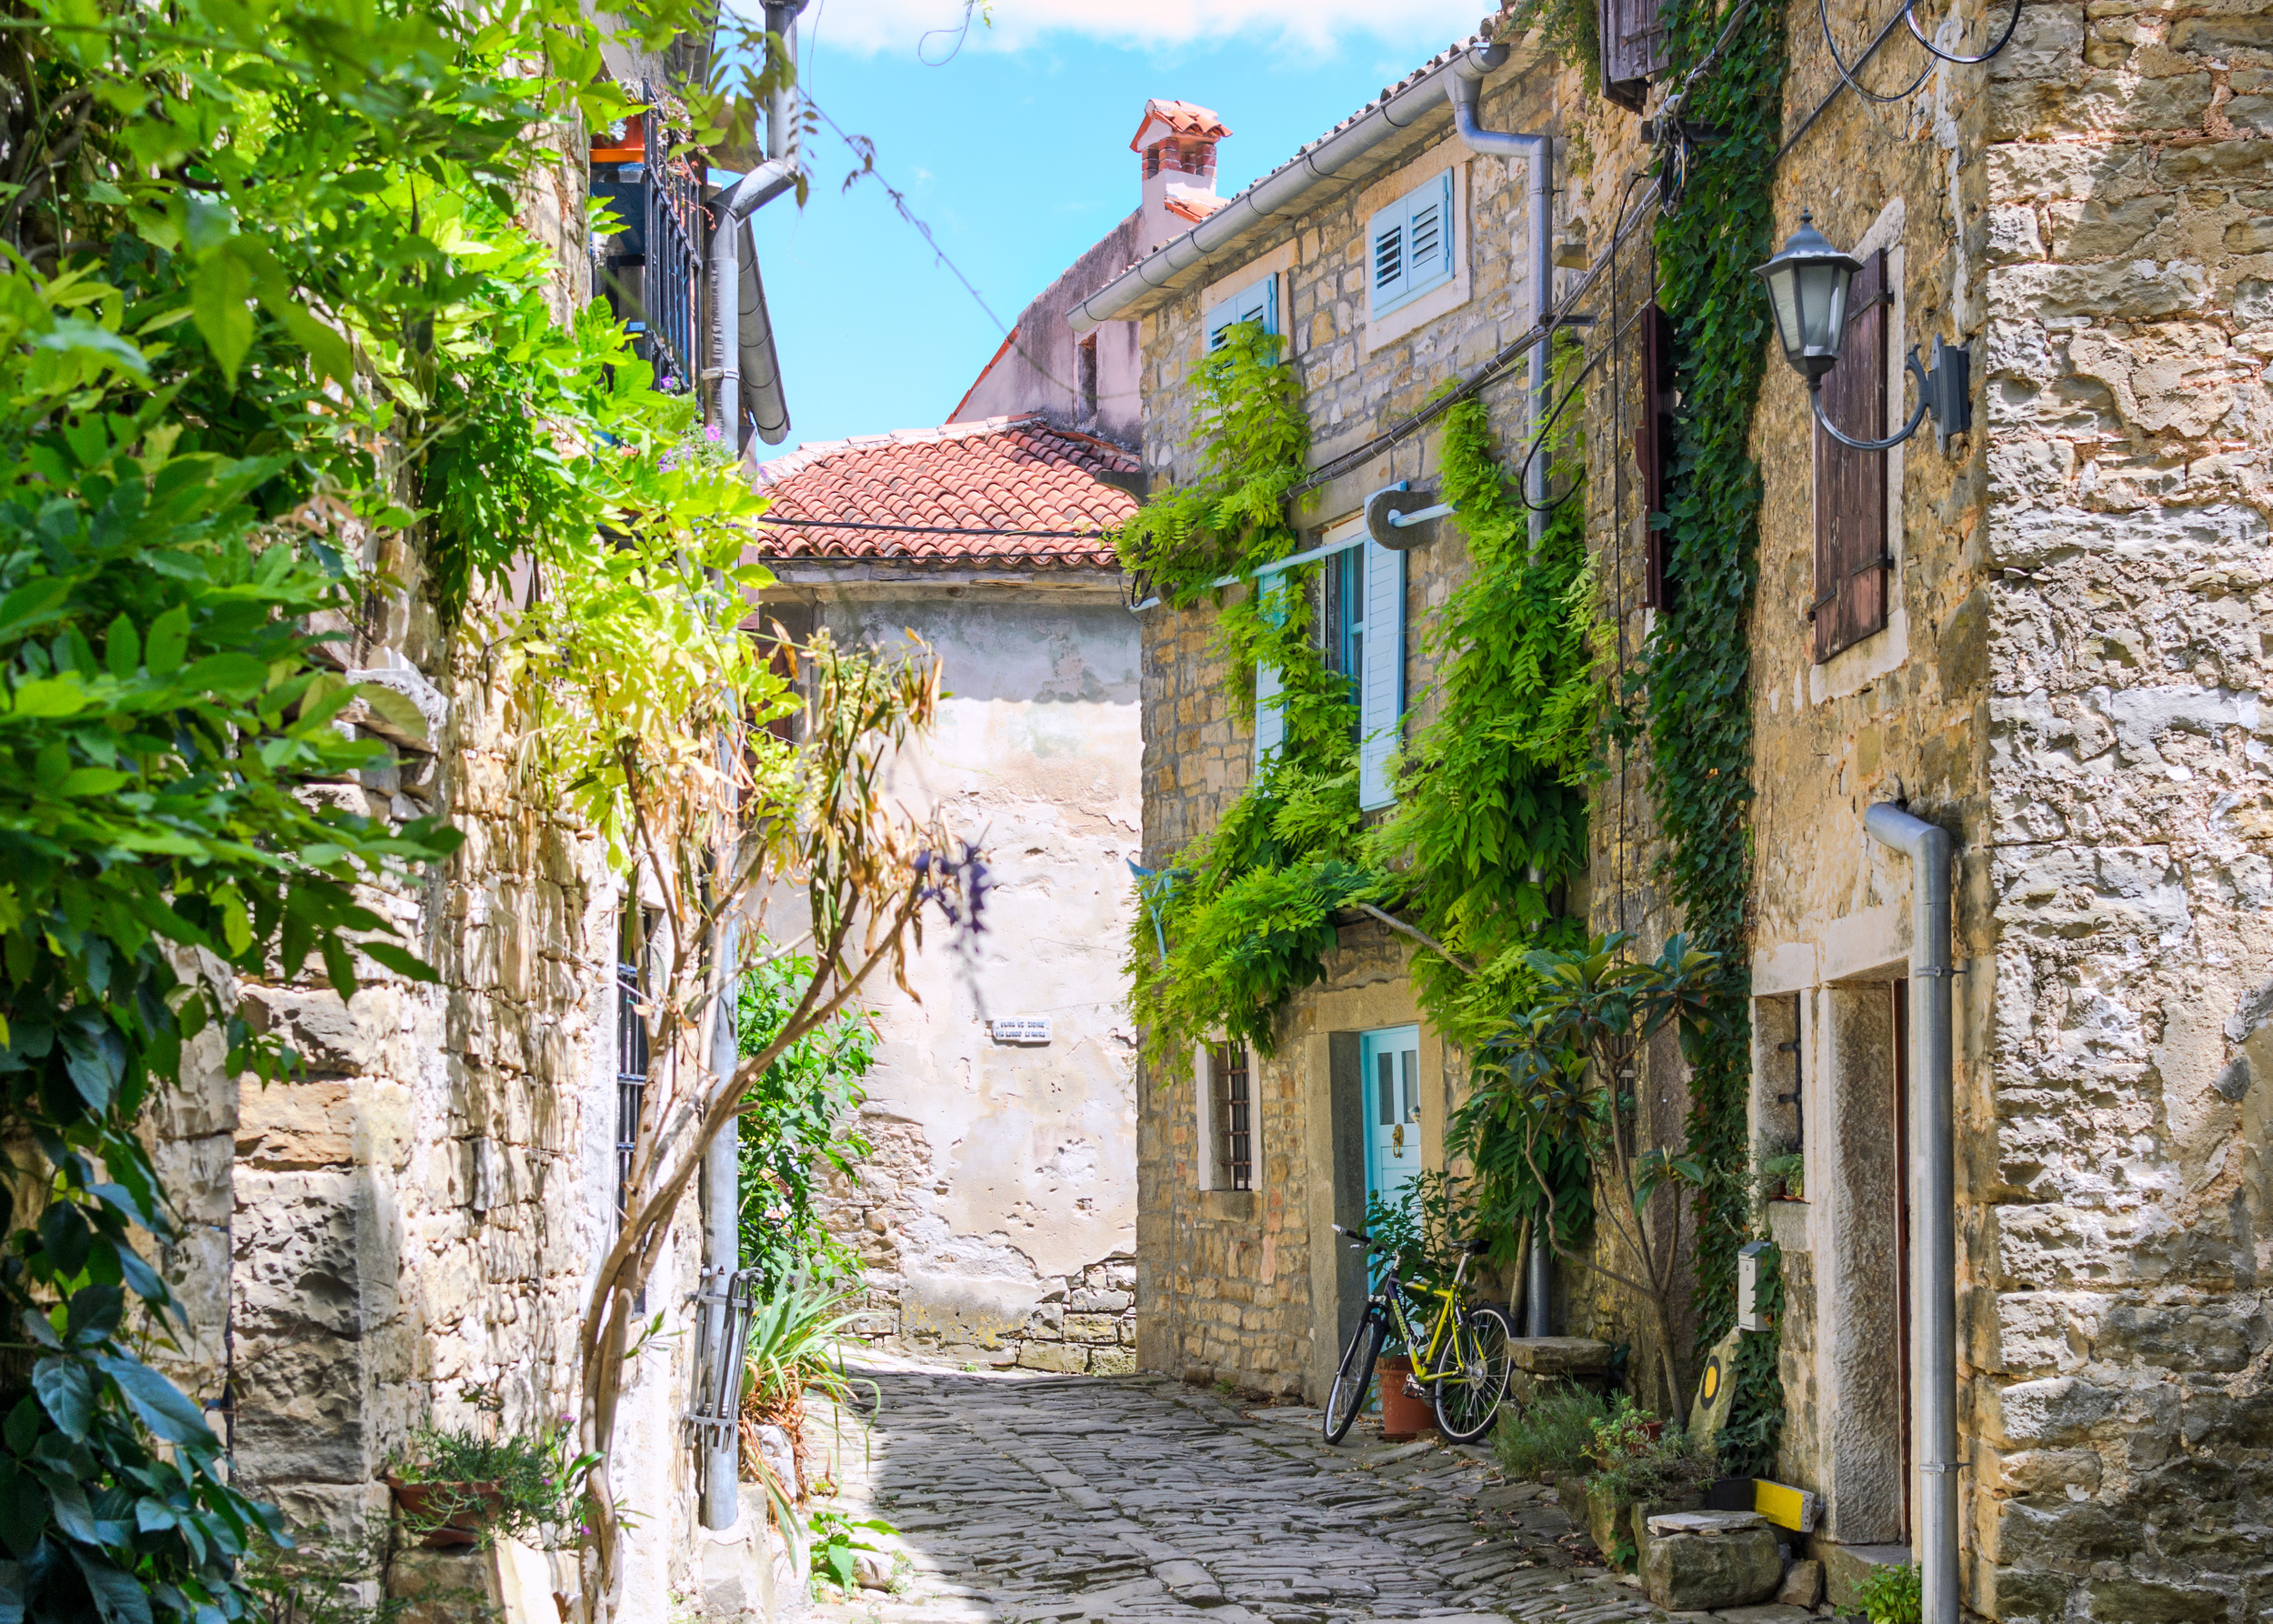 <p>Arguably Istria’s most interesting location, the town is like a mini-fairytale version of Motovun. On a hill, Grožnjan houses a music school and several galleries. Thus it’s common to hear notes playing throughout the streets as you stroll.</p><p>You may also like: <a href='https://www.yardbarker.com/lifestyle/articles/20_foolproof_crockpot_dump_recipes_you_can_try_030824/s1__39117815'>20 foolproof crockpot dump recipes you can try</a></p>